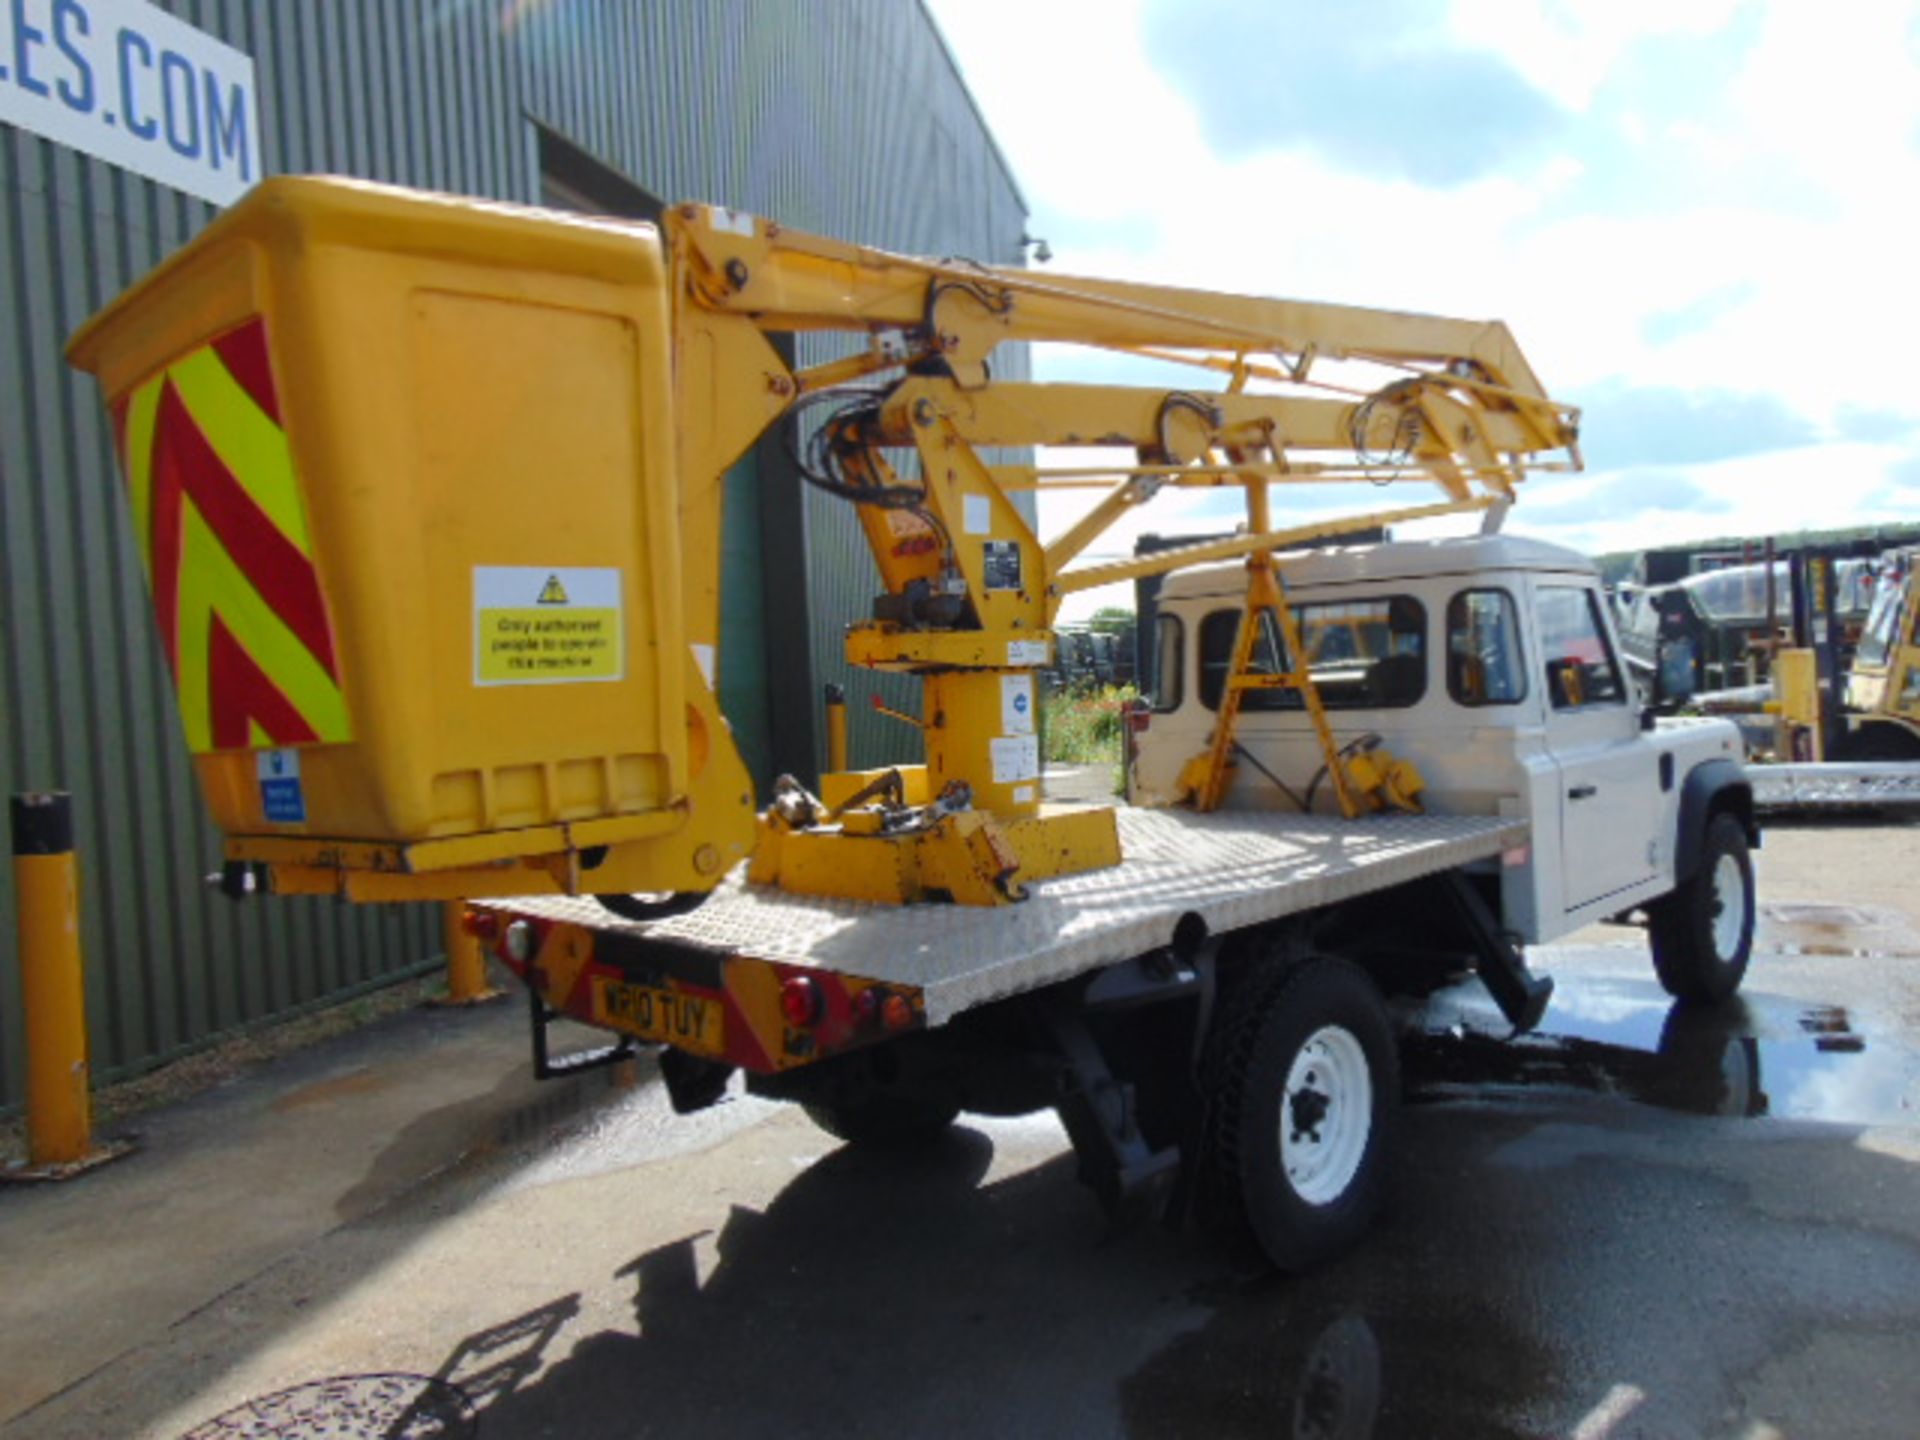 2010 Land Rover Defender 130 2.4 Puma Cherry Picker / Access Lift ONLY 83,760 MILES! - Image 9 of 32